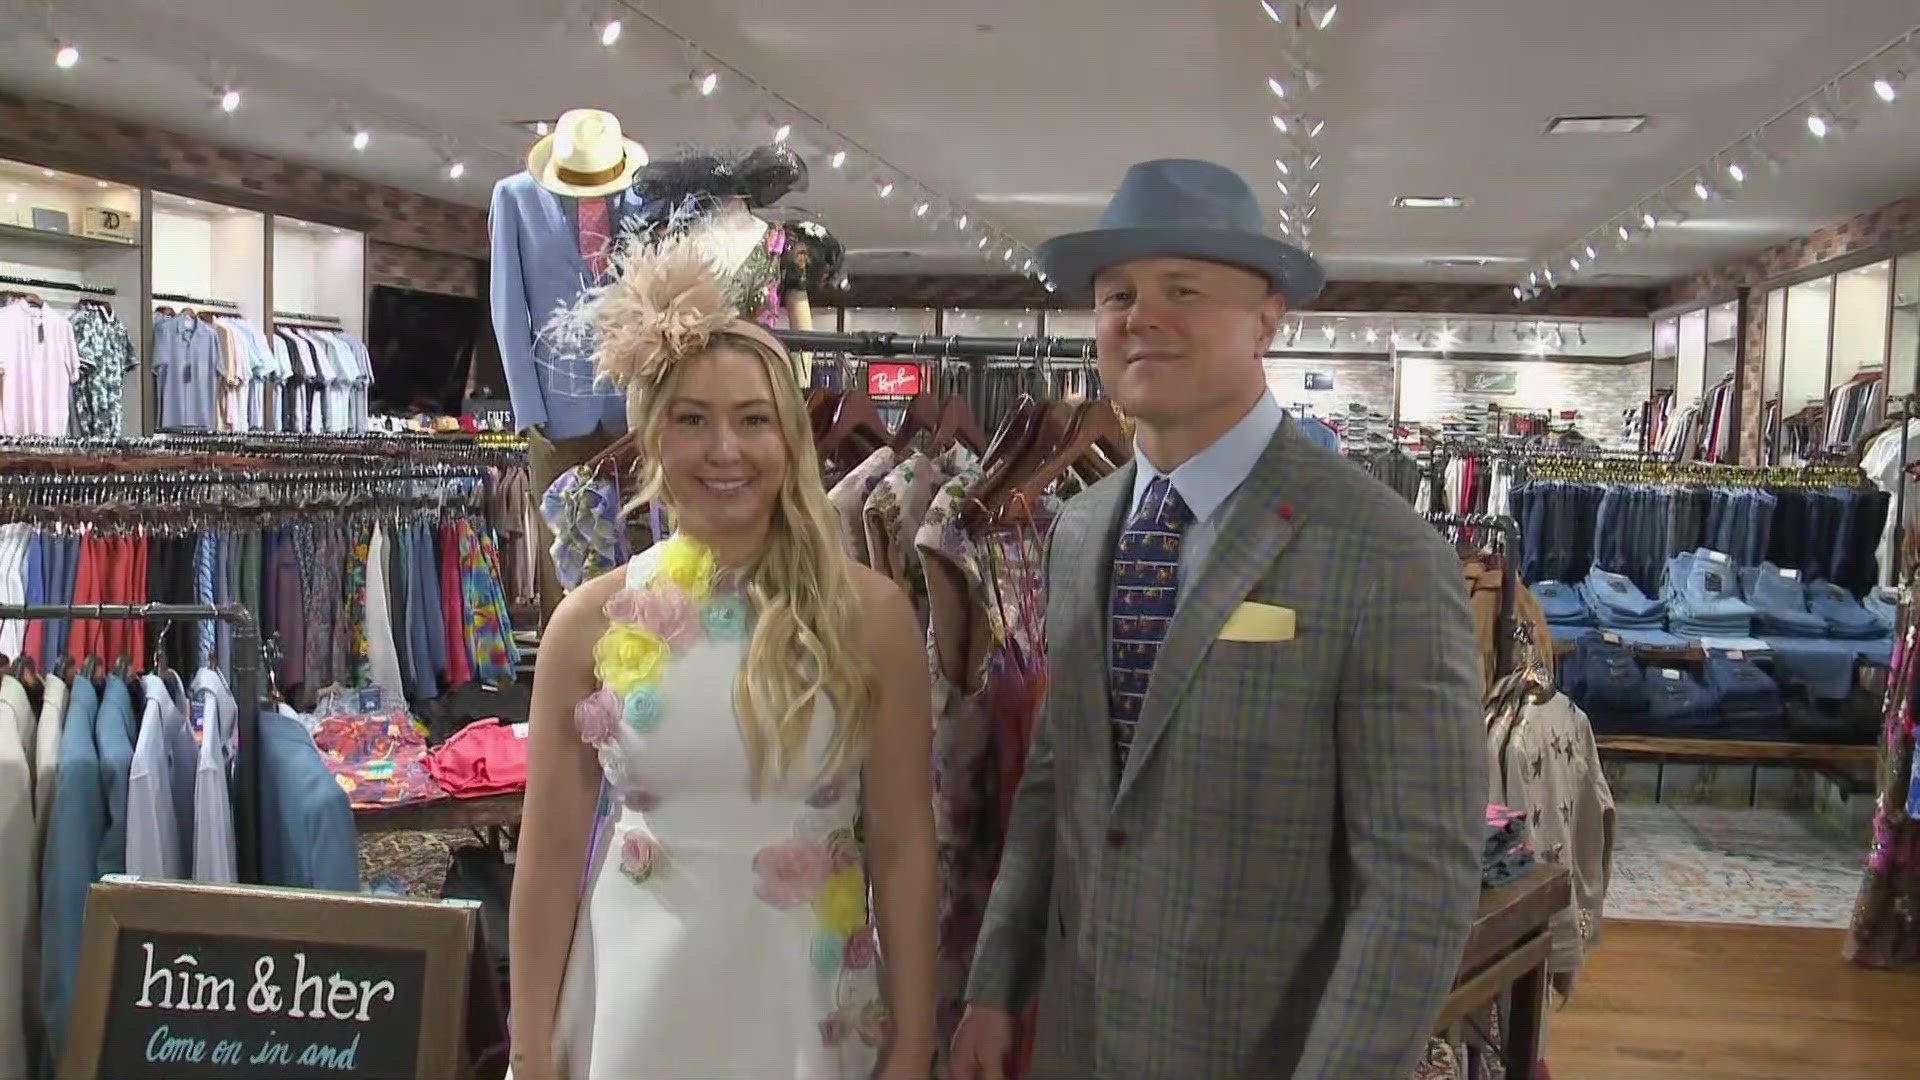 The Him & Her Boutique offers many clothes and accessories that are perfect for the Kentucky Derby.